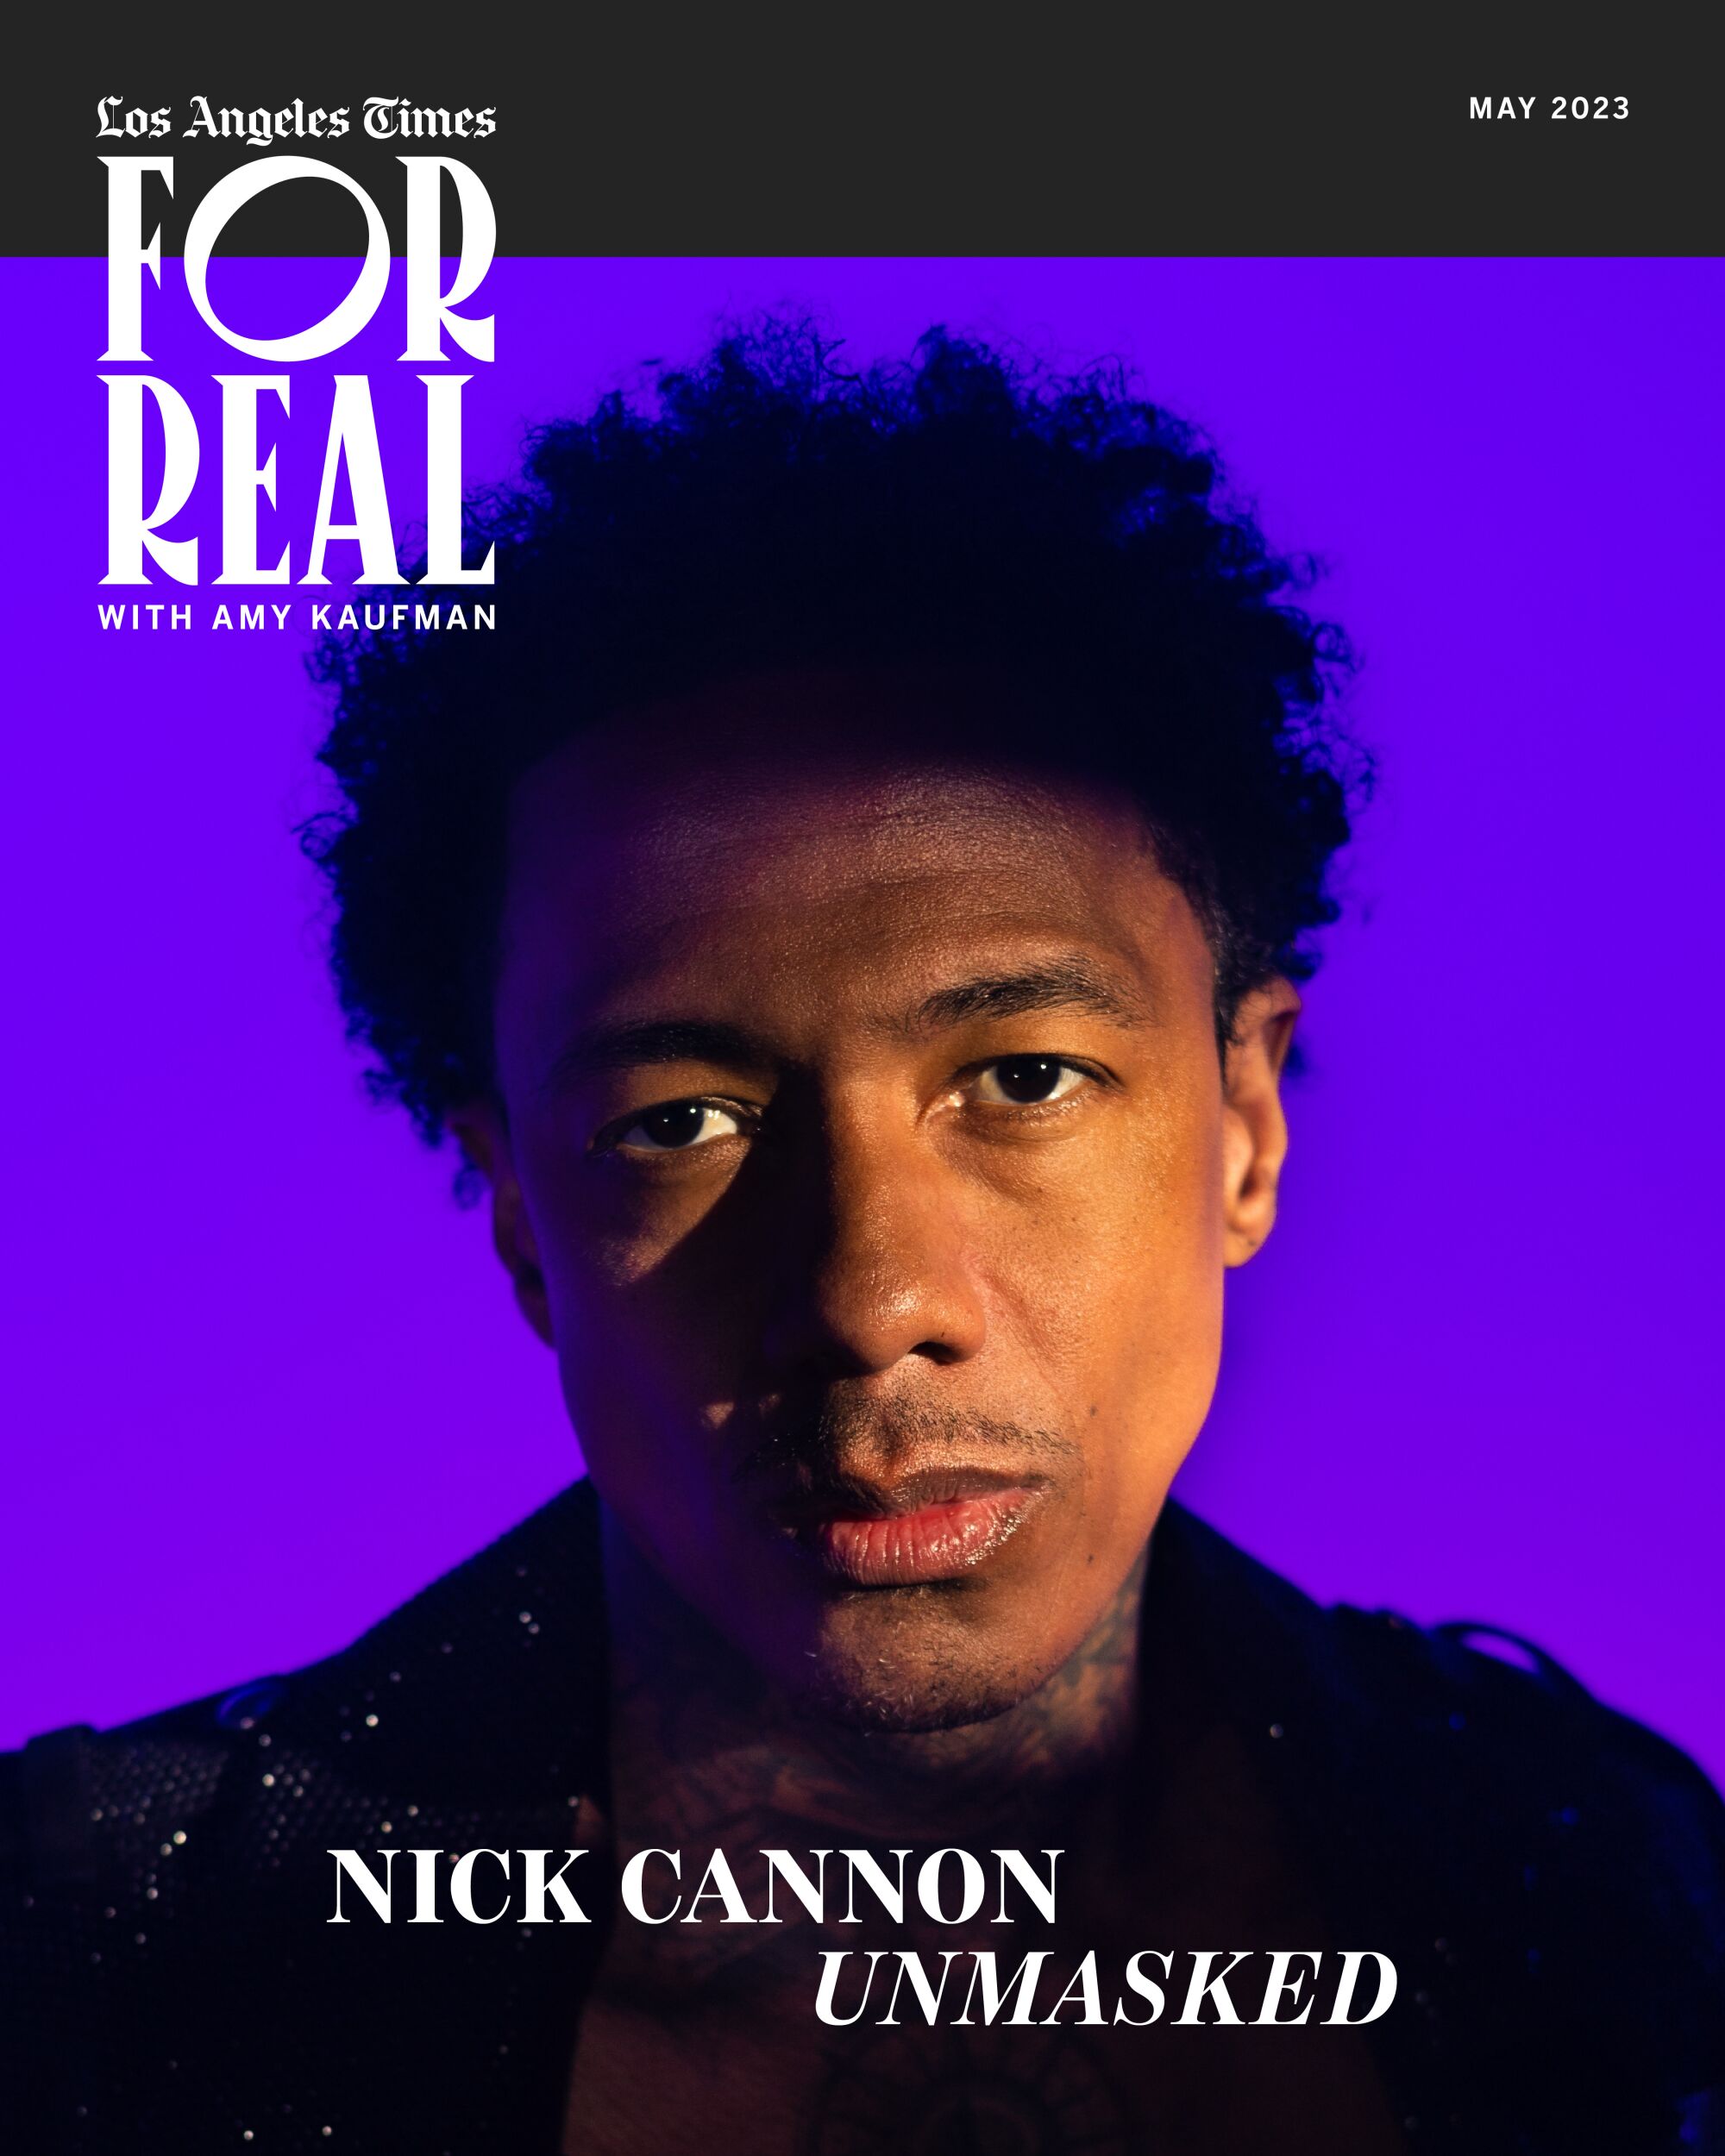 The digital cover of Amy Kaufman's For Real column, this month featuring Nick Cannon